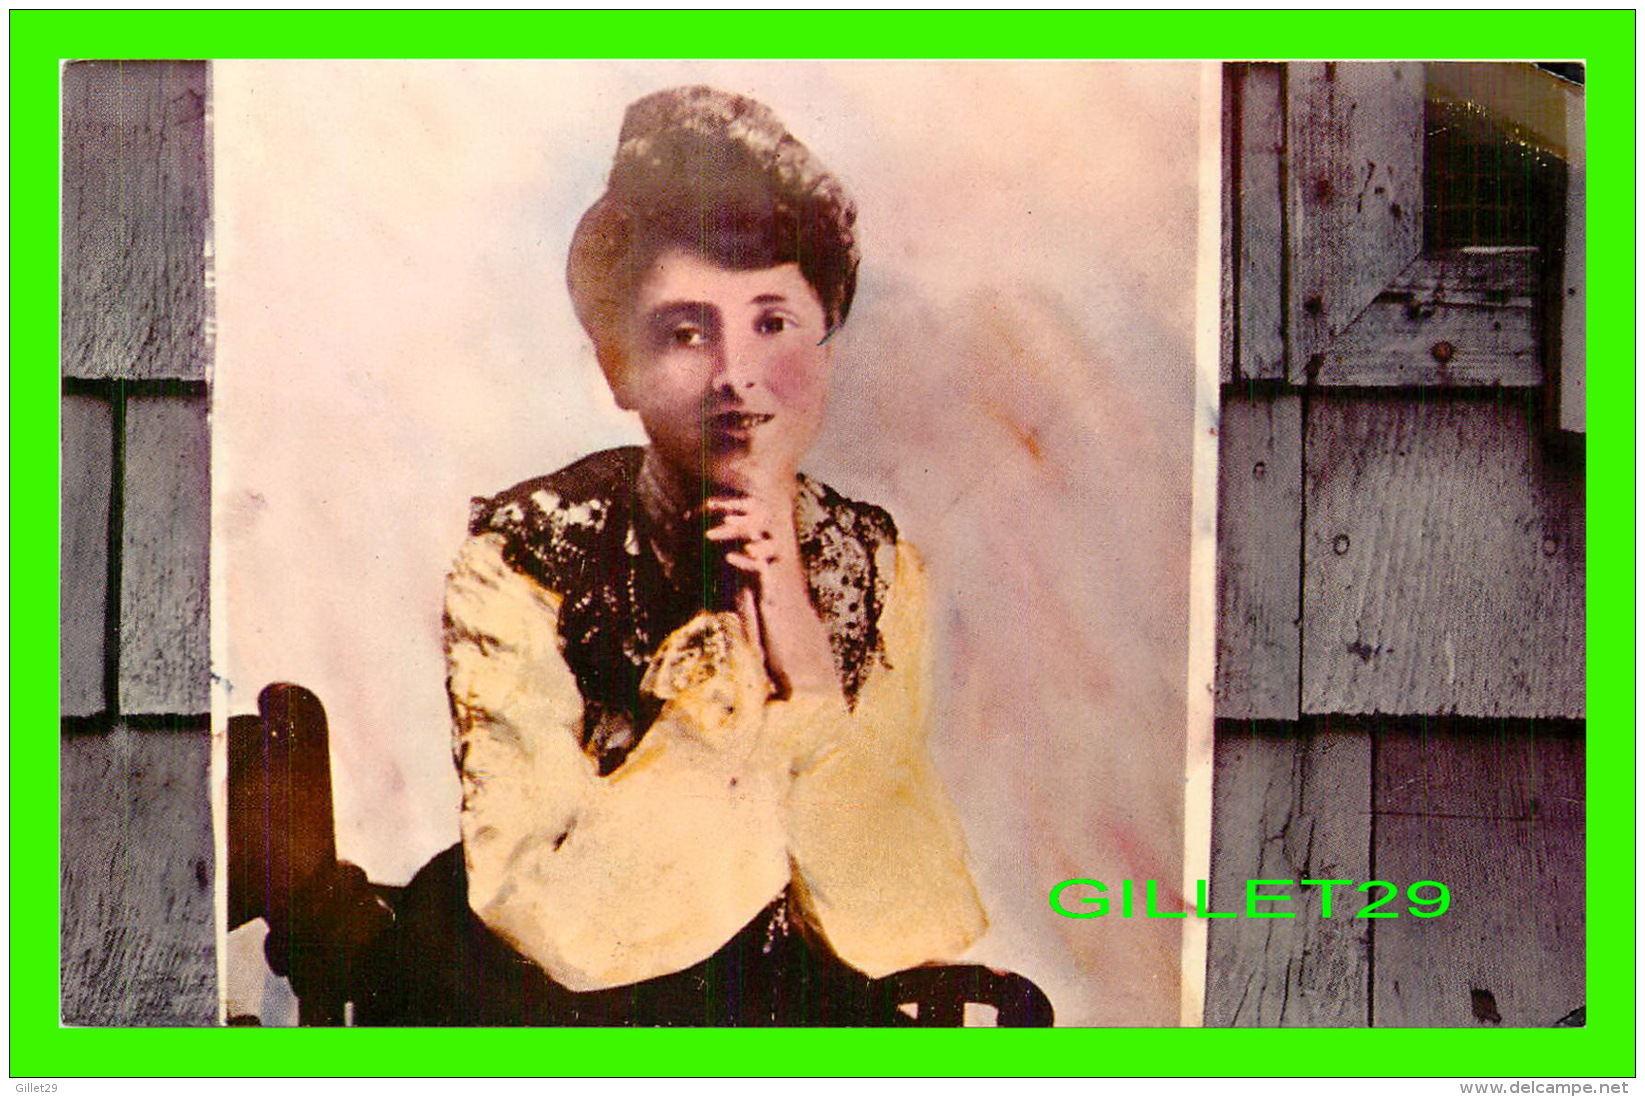 CHARLOTTETOWN, PEI - LUCY MAUD MONTGOMERY - AUTHOR OD ANNE OF GREEN GABLES - H. S. CROCKER CO INC - - Charlottetown